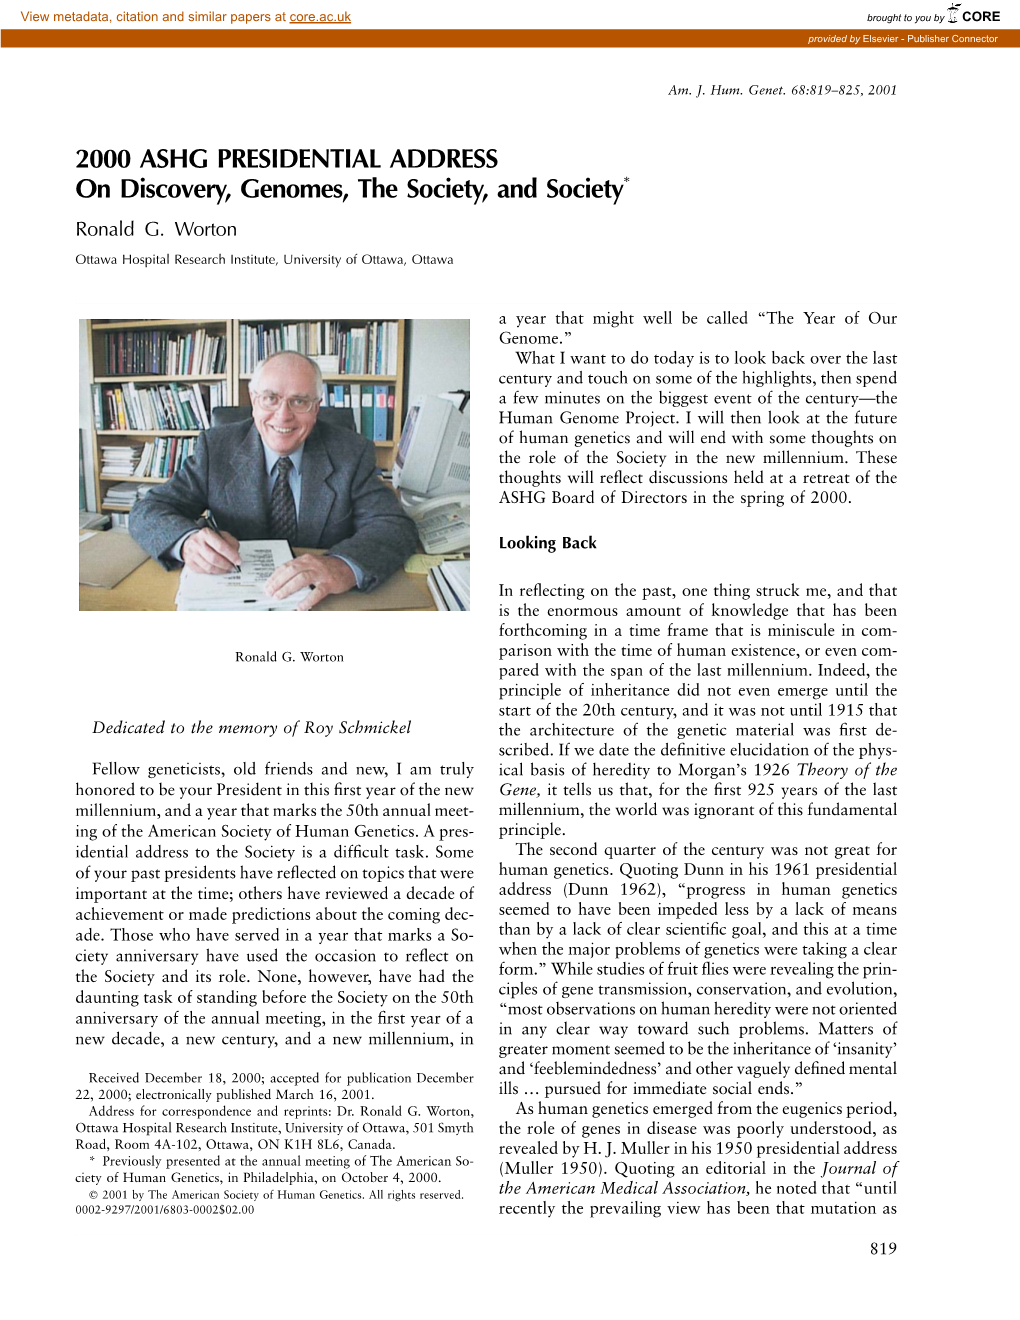 2000 ASHG PRESIDENTIAL ADDRESS on Discovery, Genomes, the Society, and Society* Ronald G